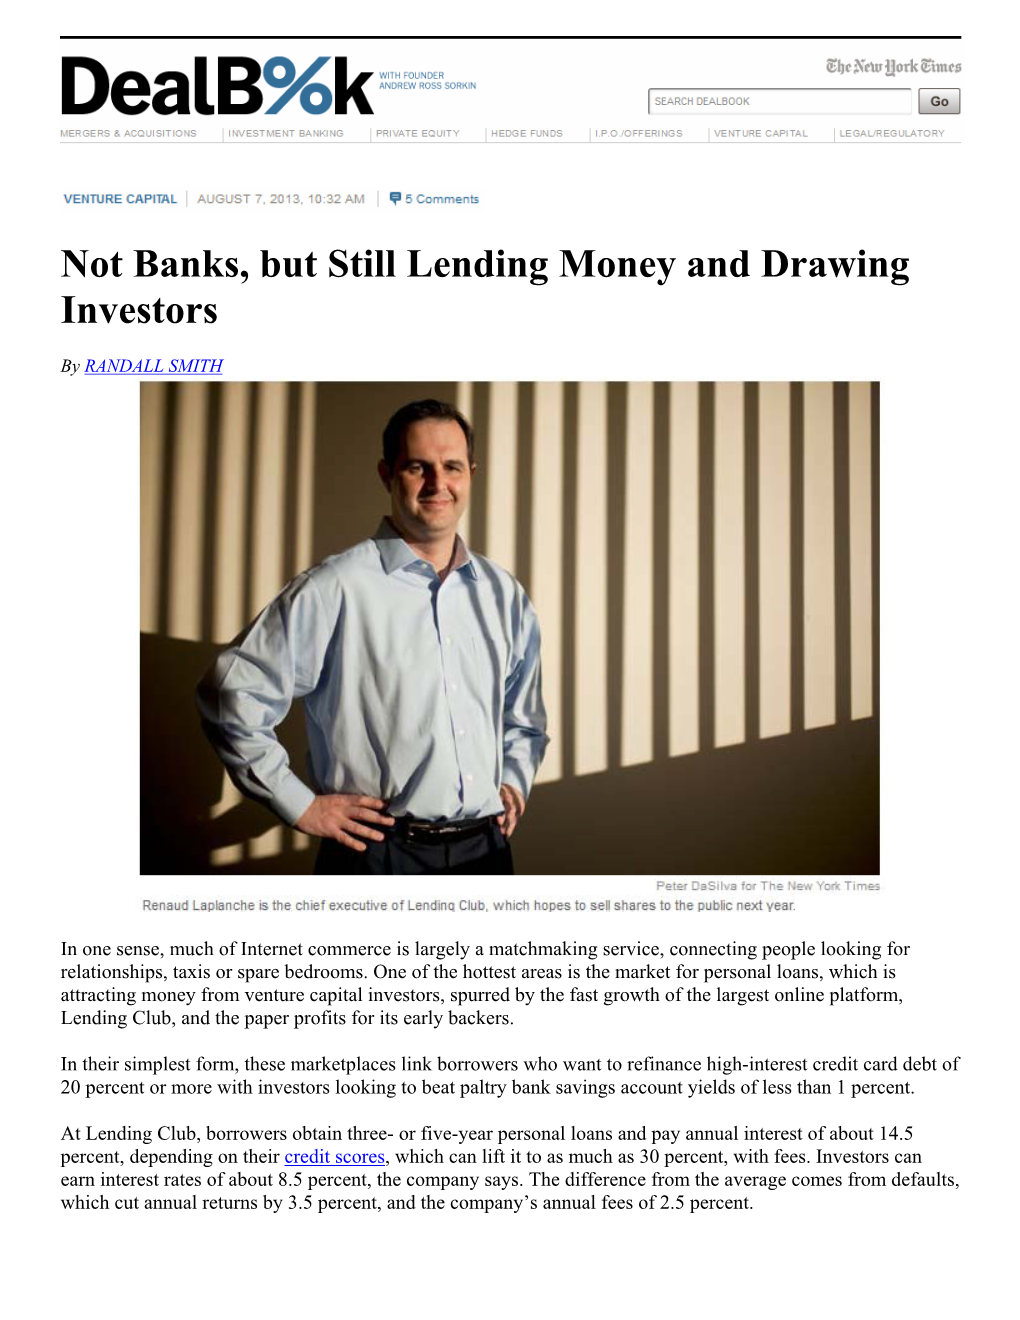 Not Banks, but Still Lending Money and Drawing Investors